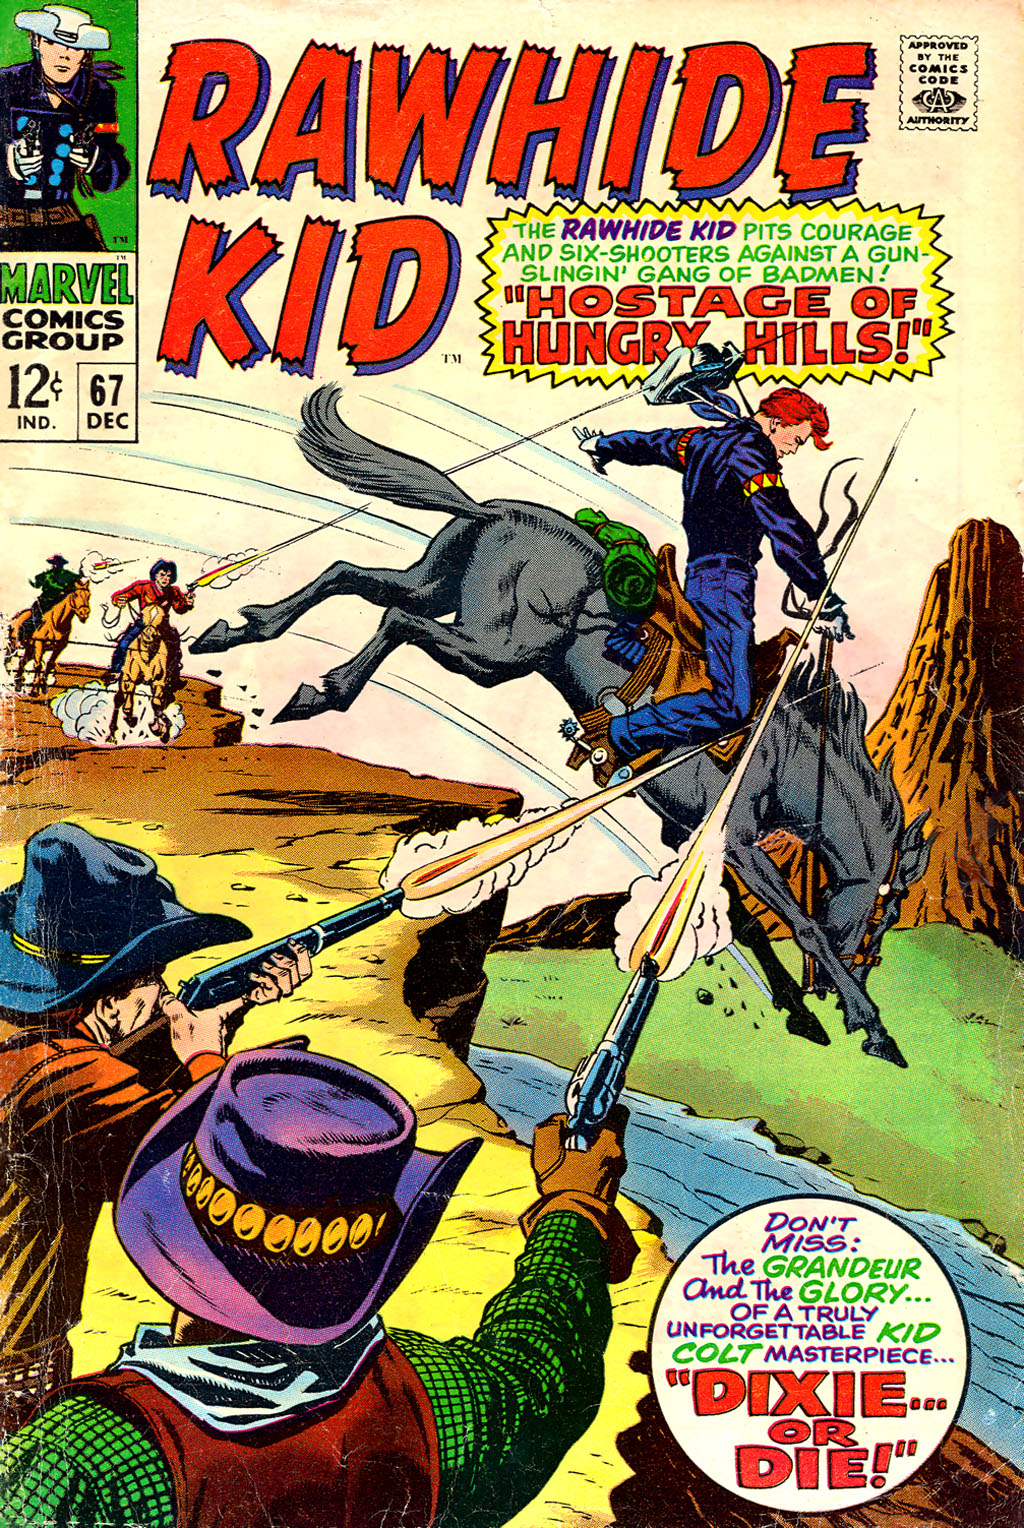 Read online The Rawhide Kid comic -  Issue #67 - 1